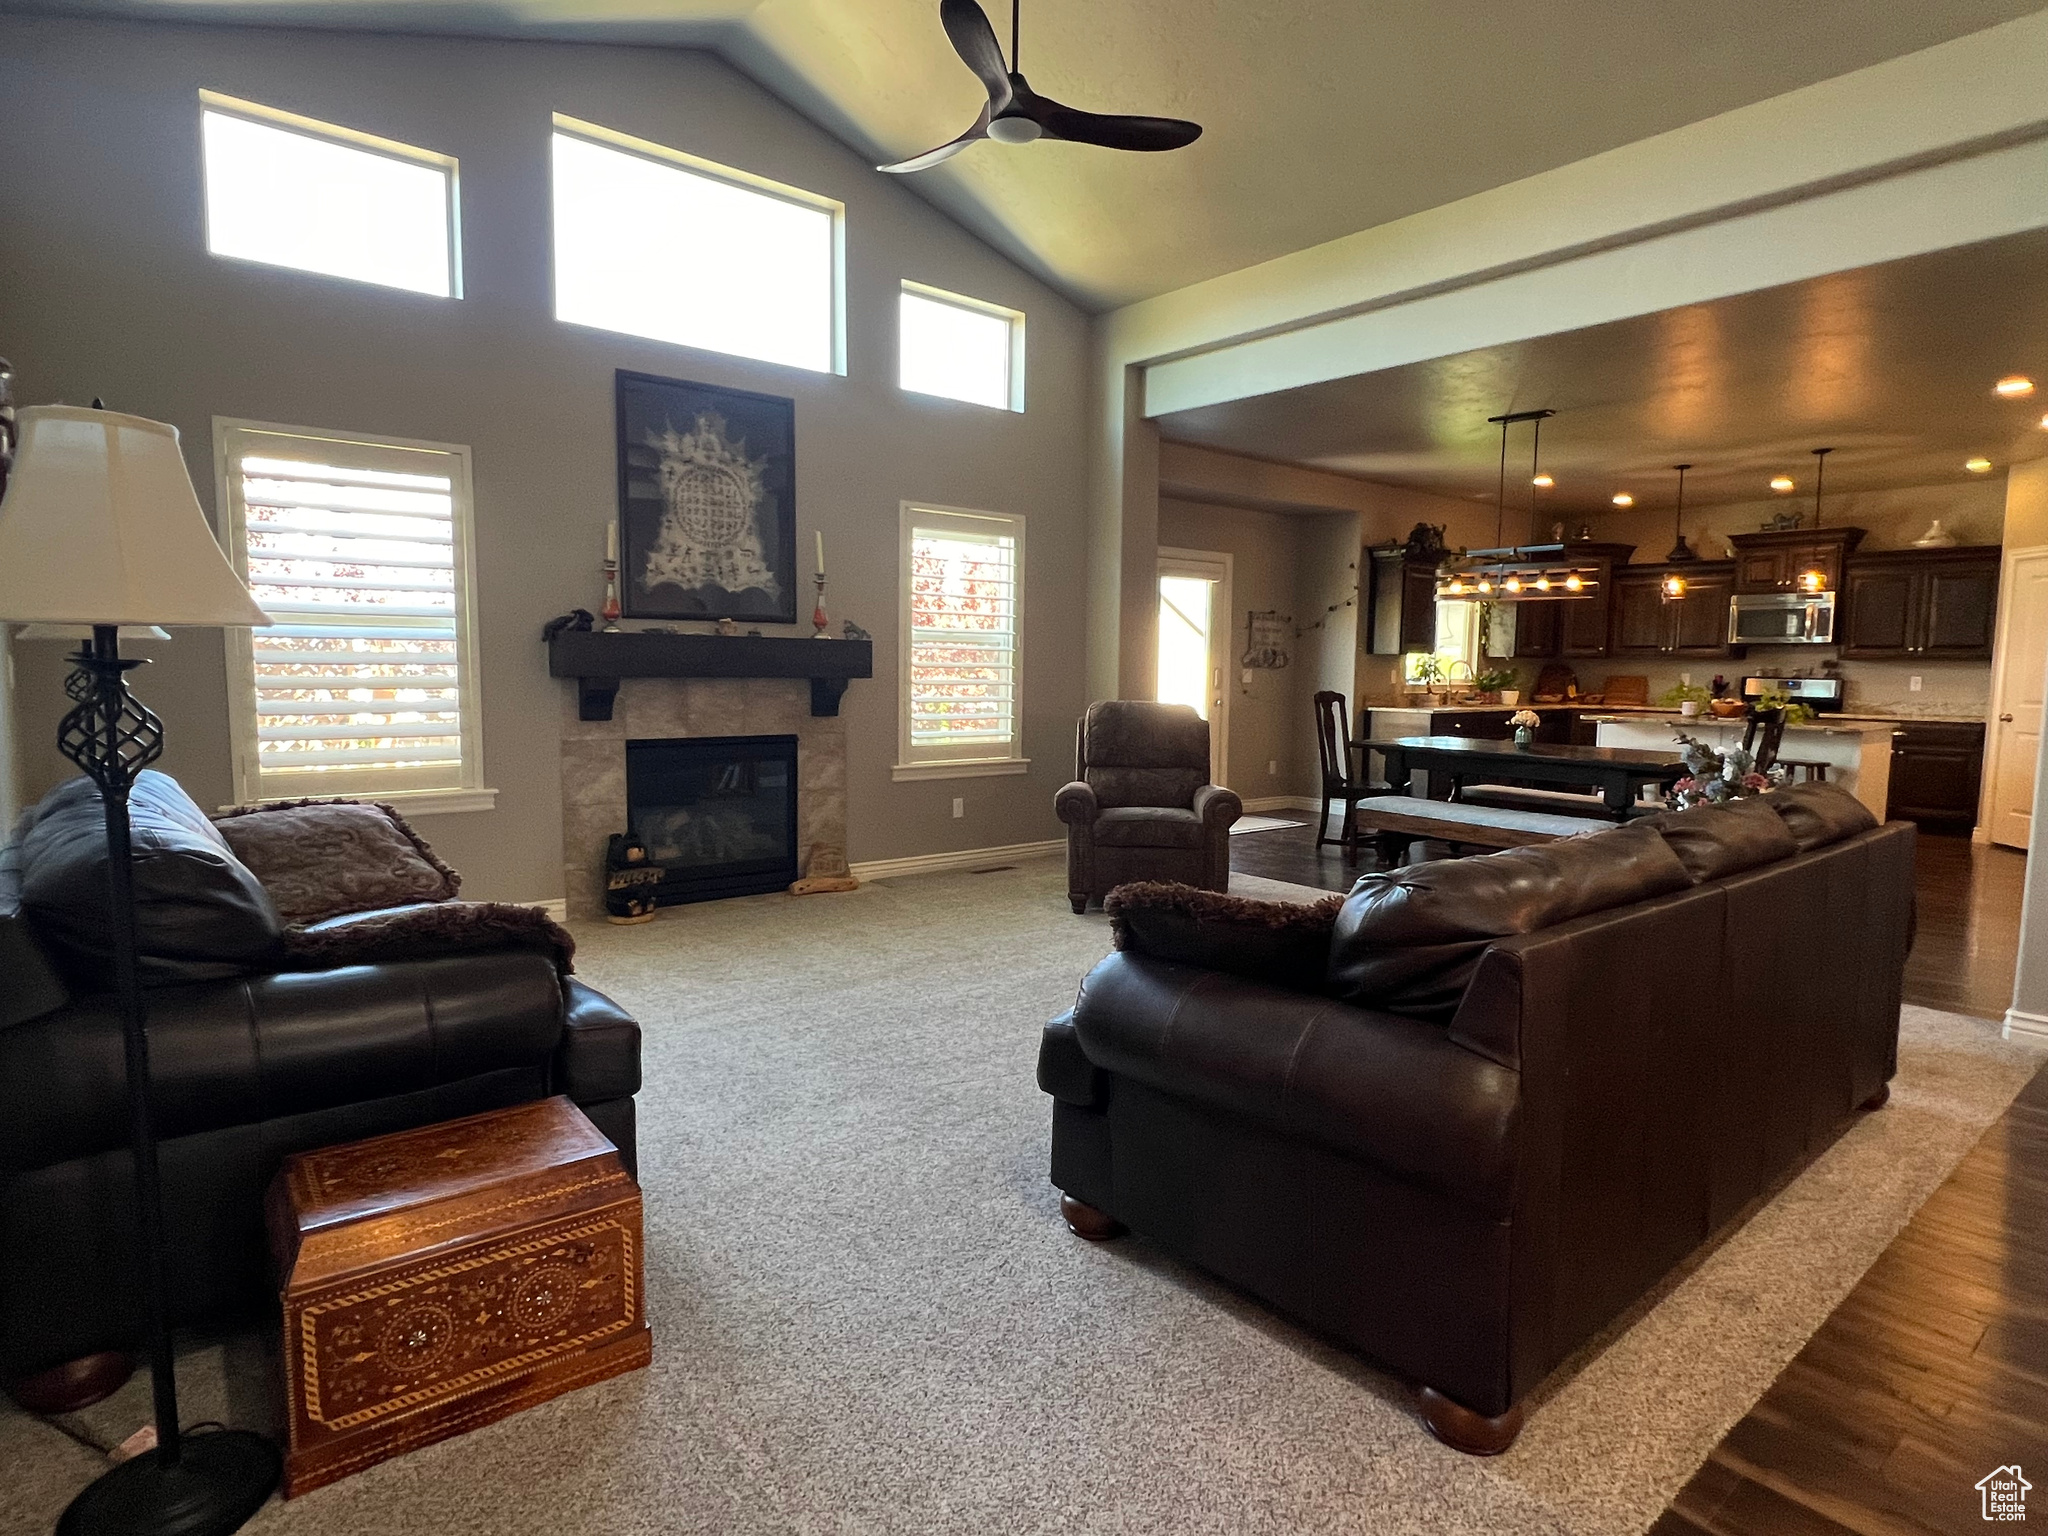 Great room featuring a fireplace, ceiling fan, and lofted ceiling